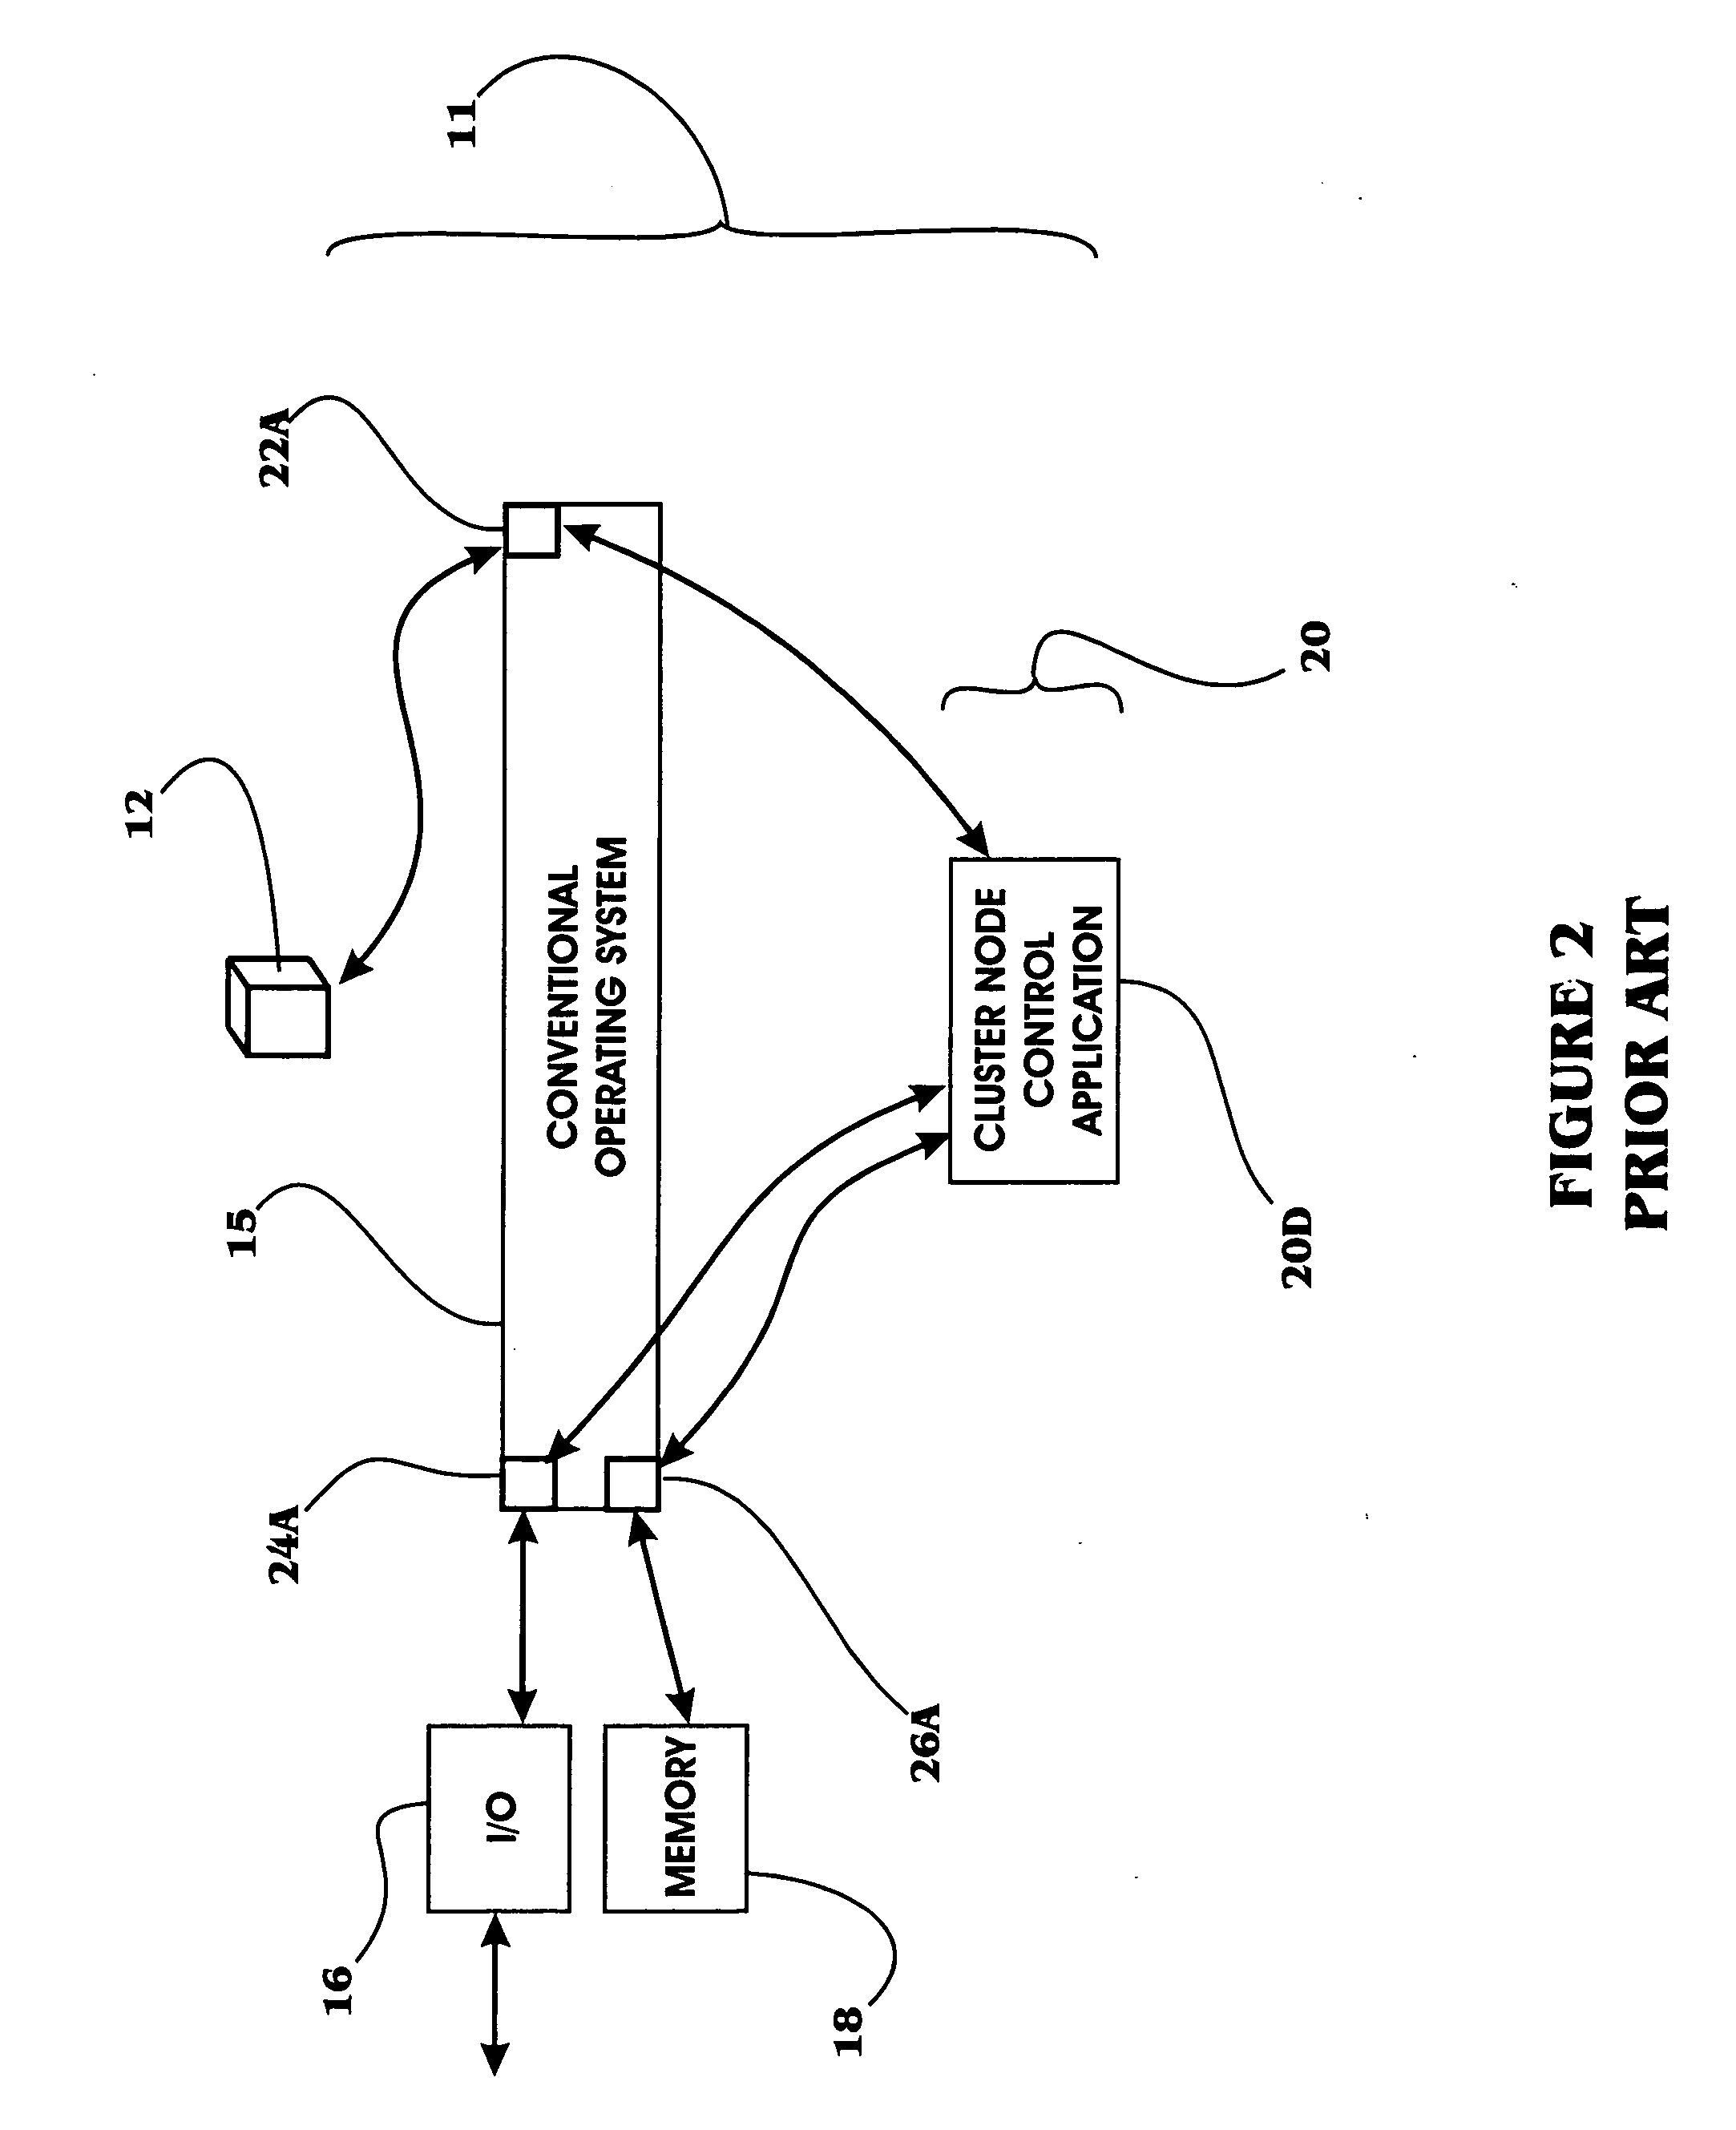 Expanded method and system for parallel operation and control of legacy computer clusters